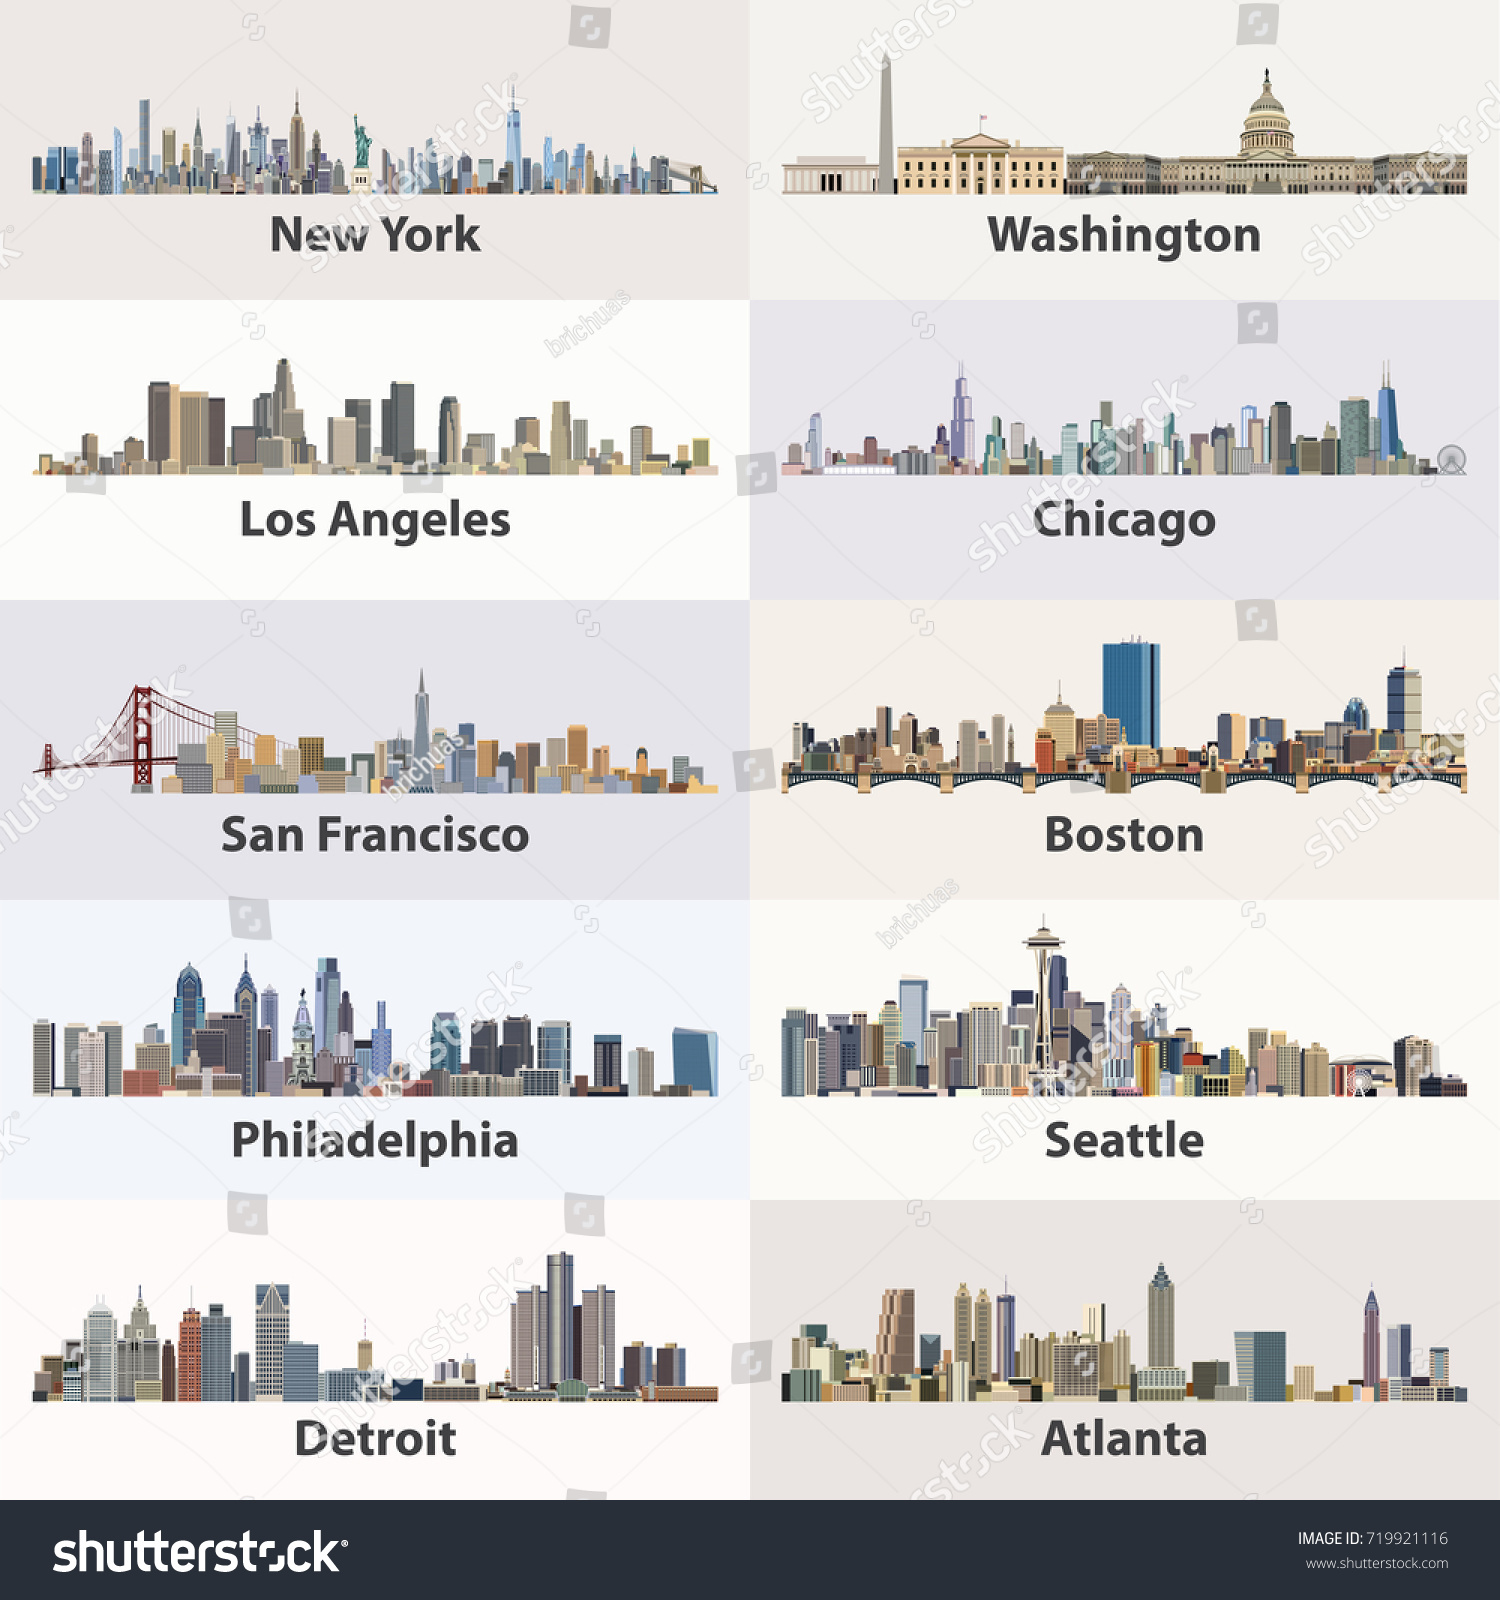 SVG of United States cities skylines vector collection svg